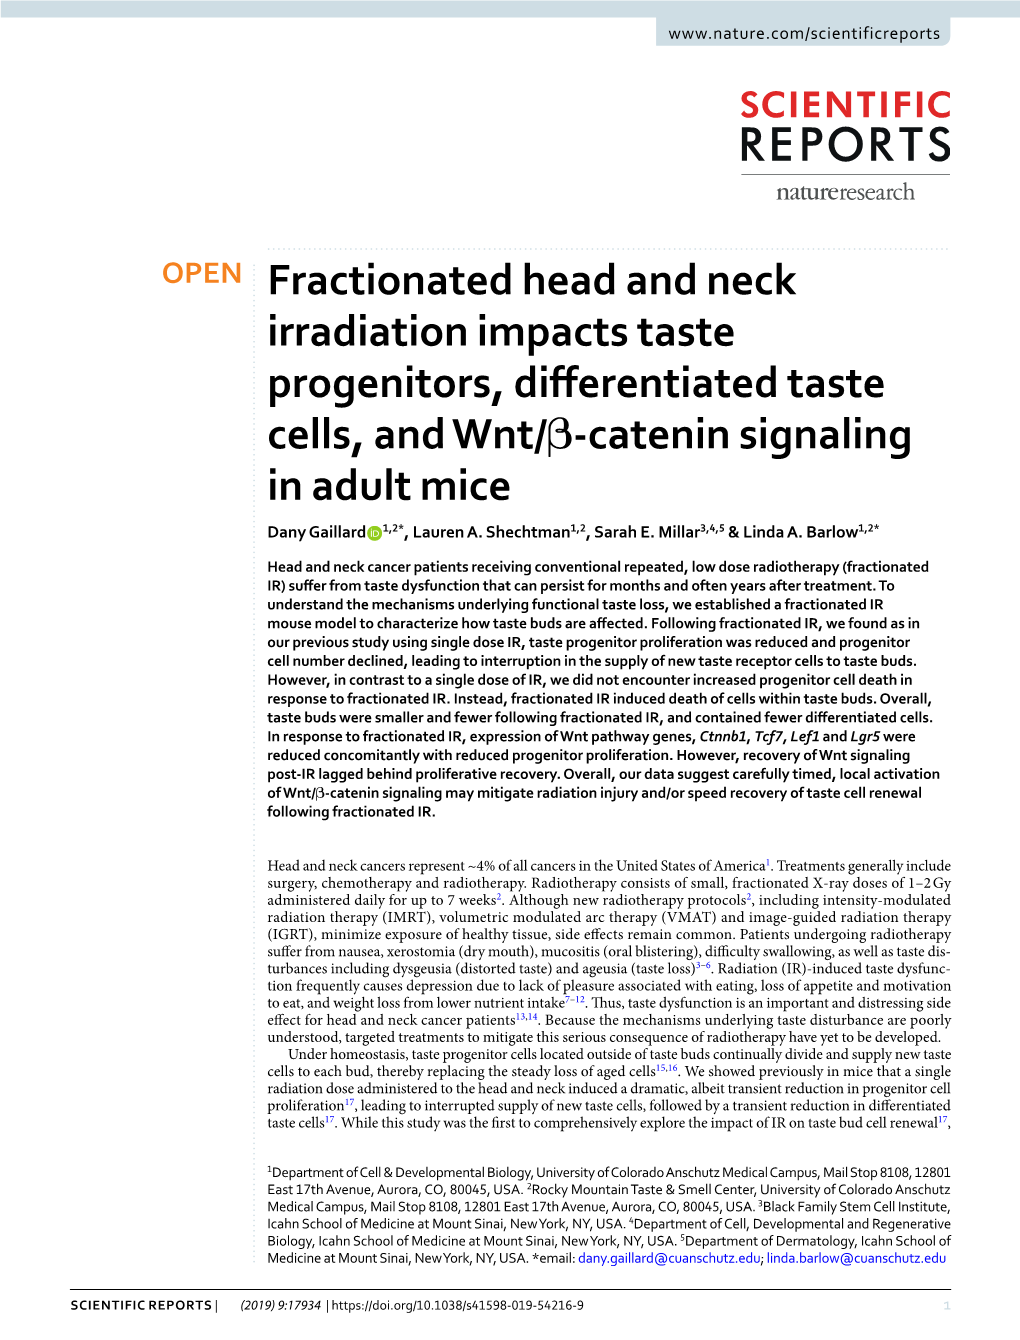 Fractionated Head and Neck Irradiation Impacts Taste Progenitors, Diferentiated Taste Cells, and Wnt/Β-Catenin Signaling in Adult Mice Dany Gaillard 1,2*, Lauren A